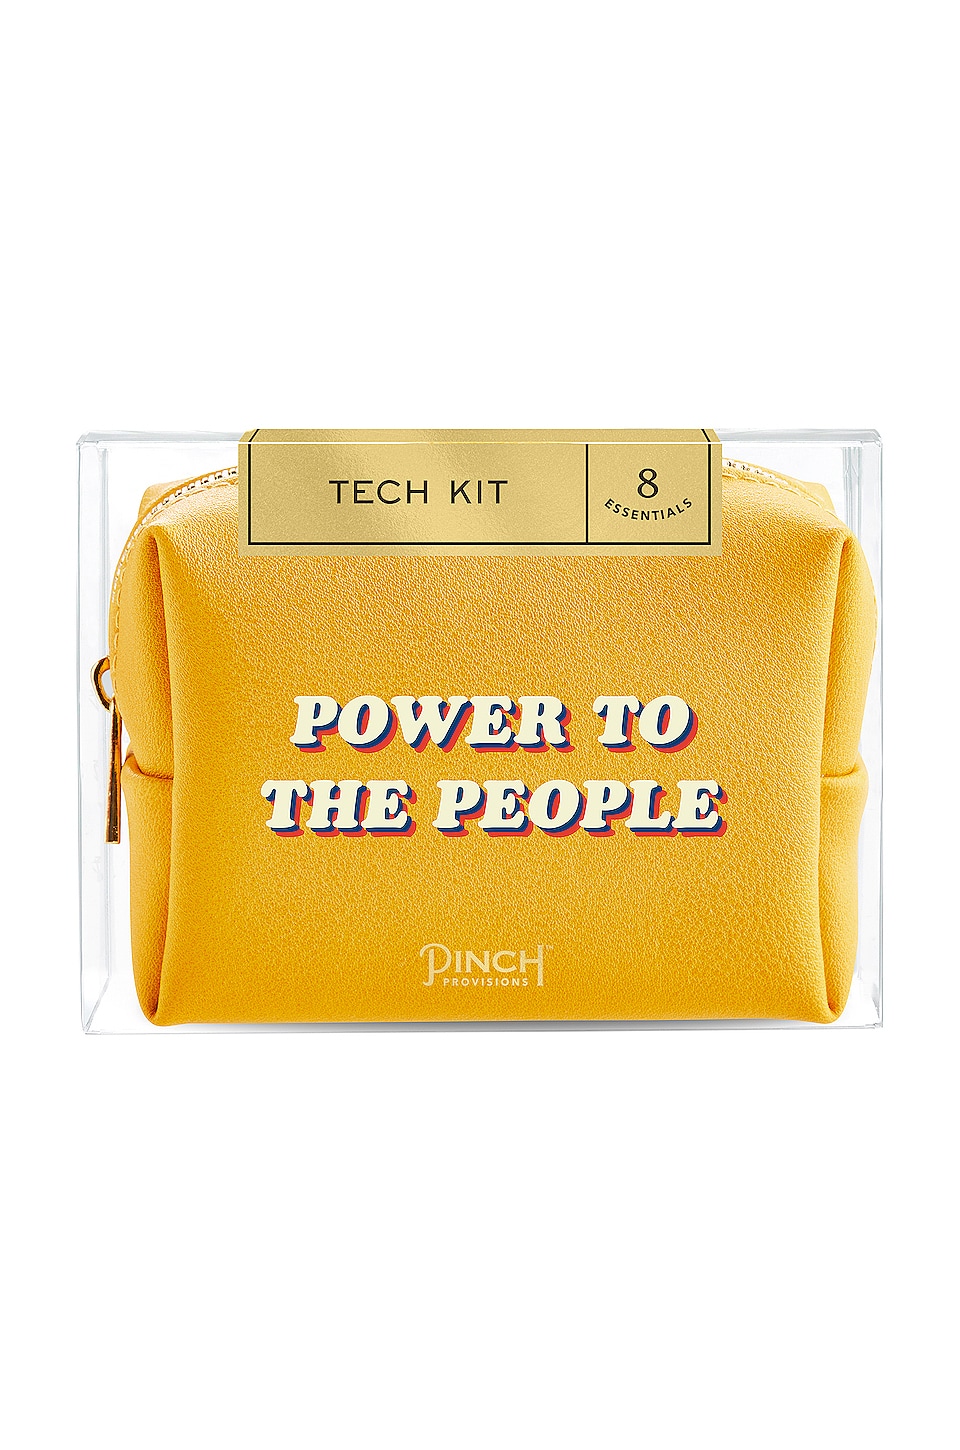 Pinch Provisions Power to the People Tech Kit 